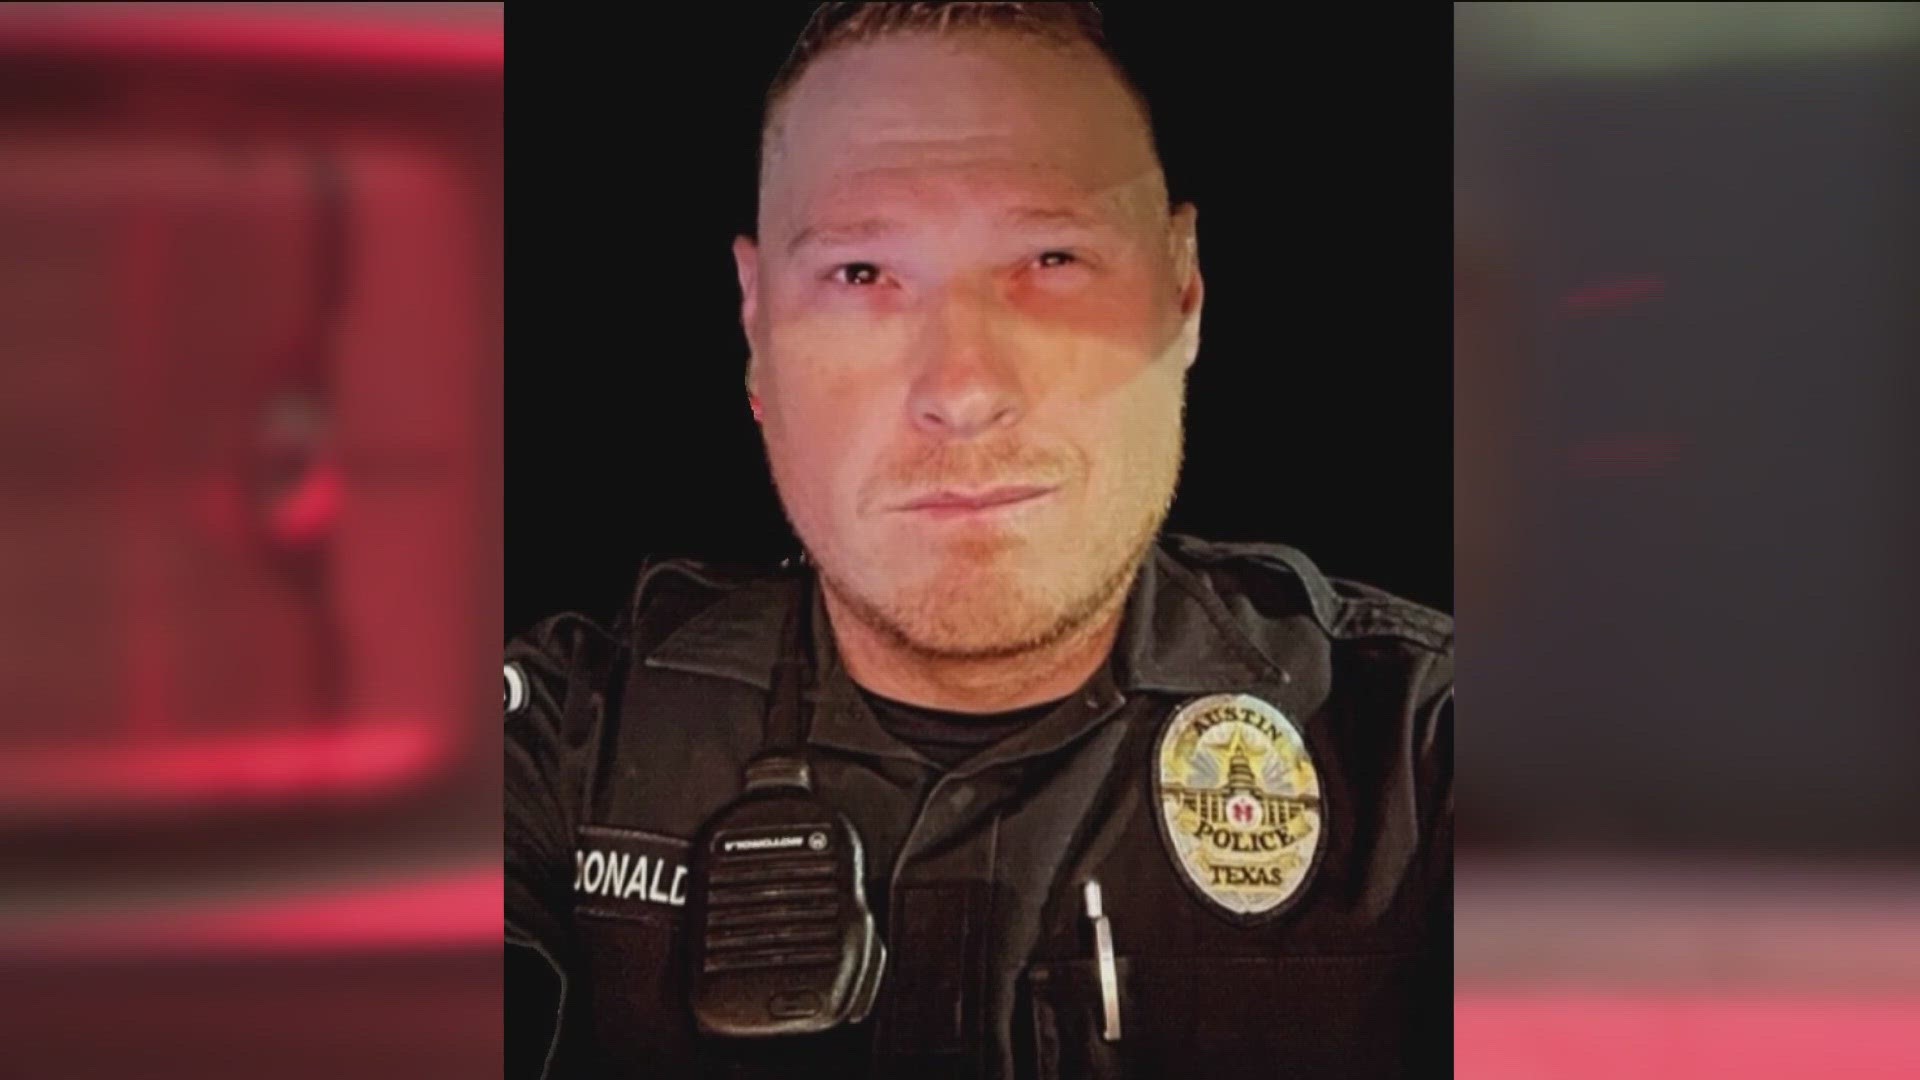 A Pflugerville man is under arrest after police say he pretended to be an Austin police officer for more than three years. APD found photos of him in uniform.